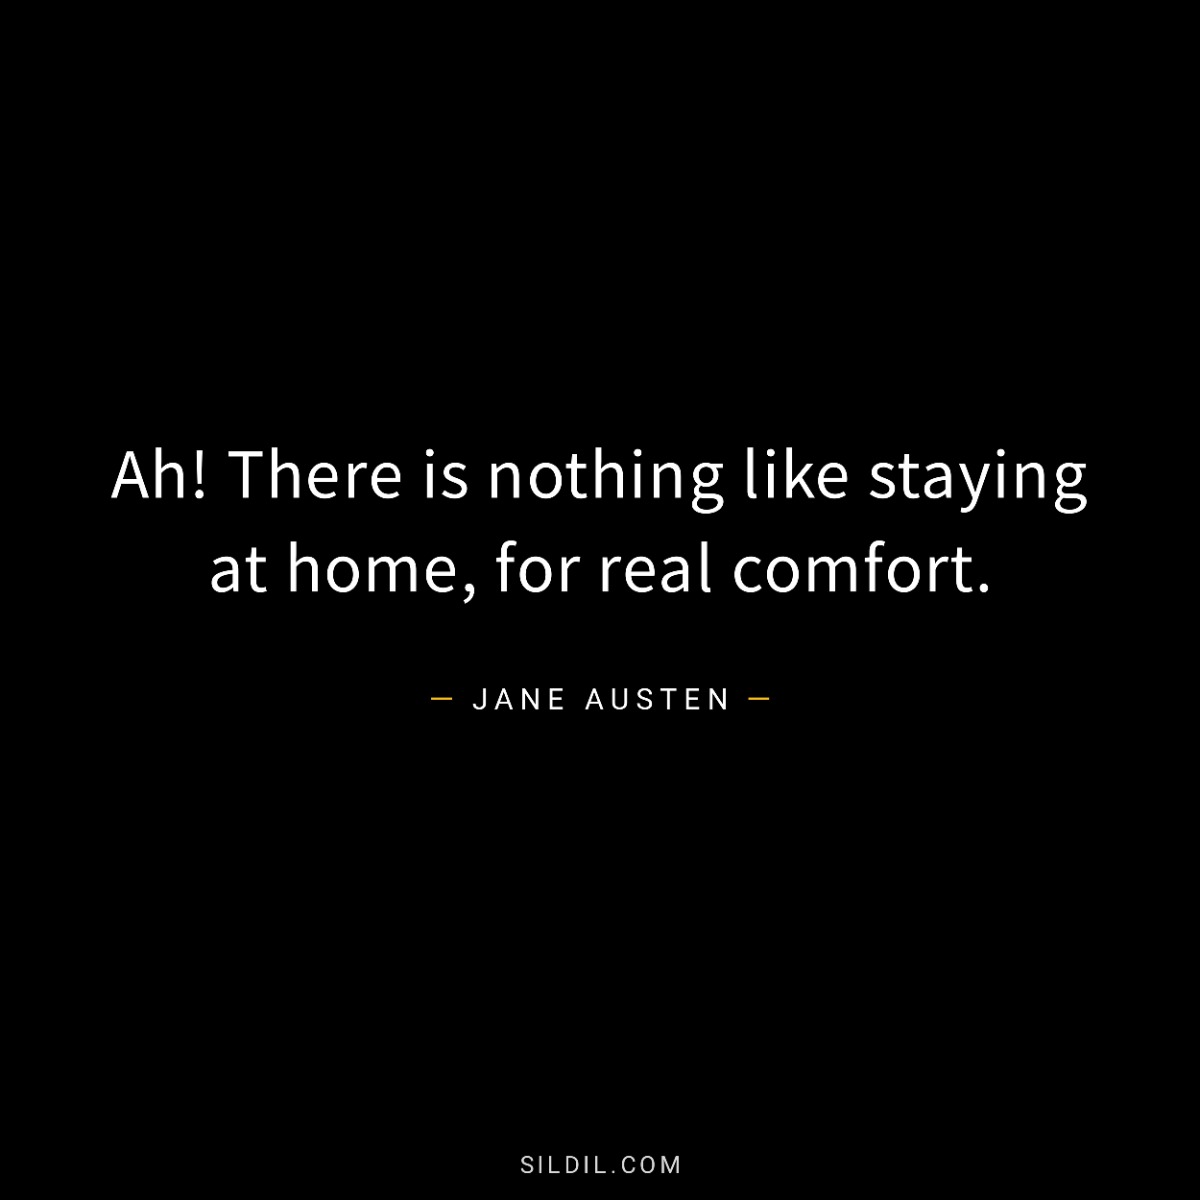 Ah! There is nothing like staying at home, for real comfort.